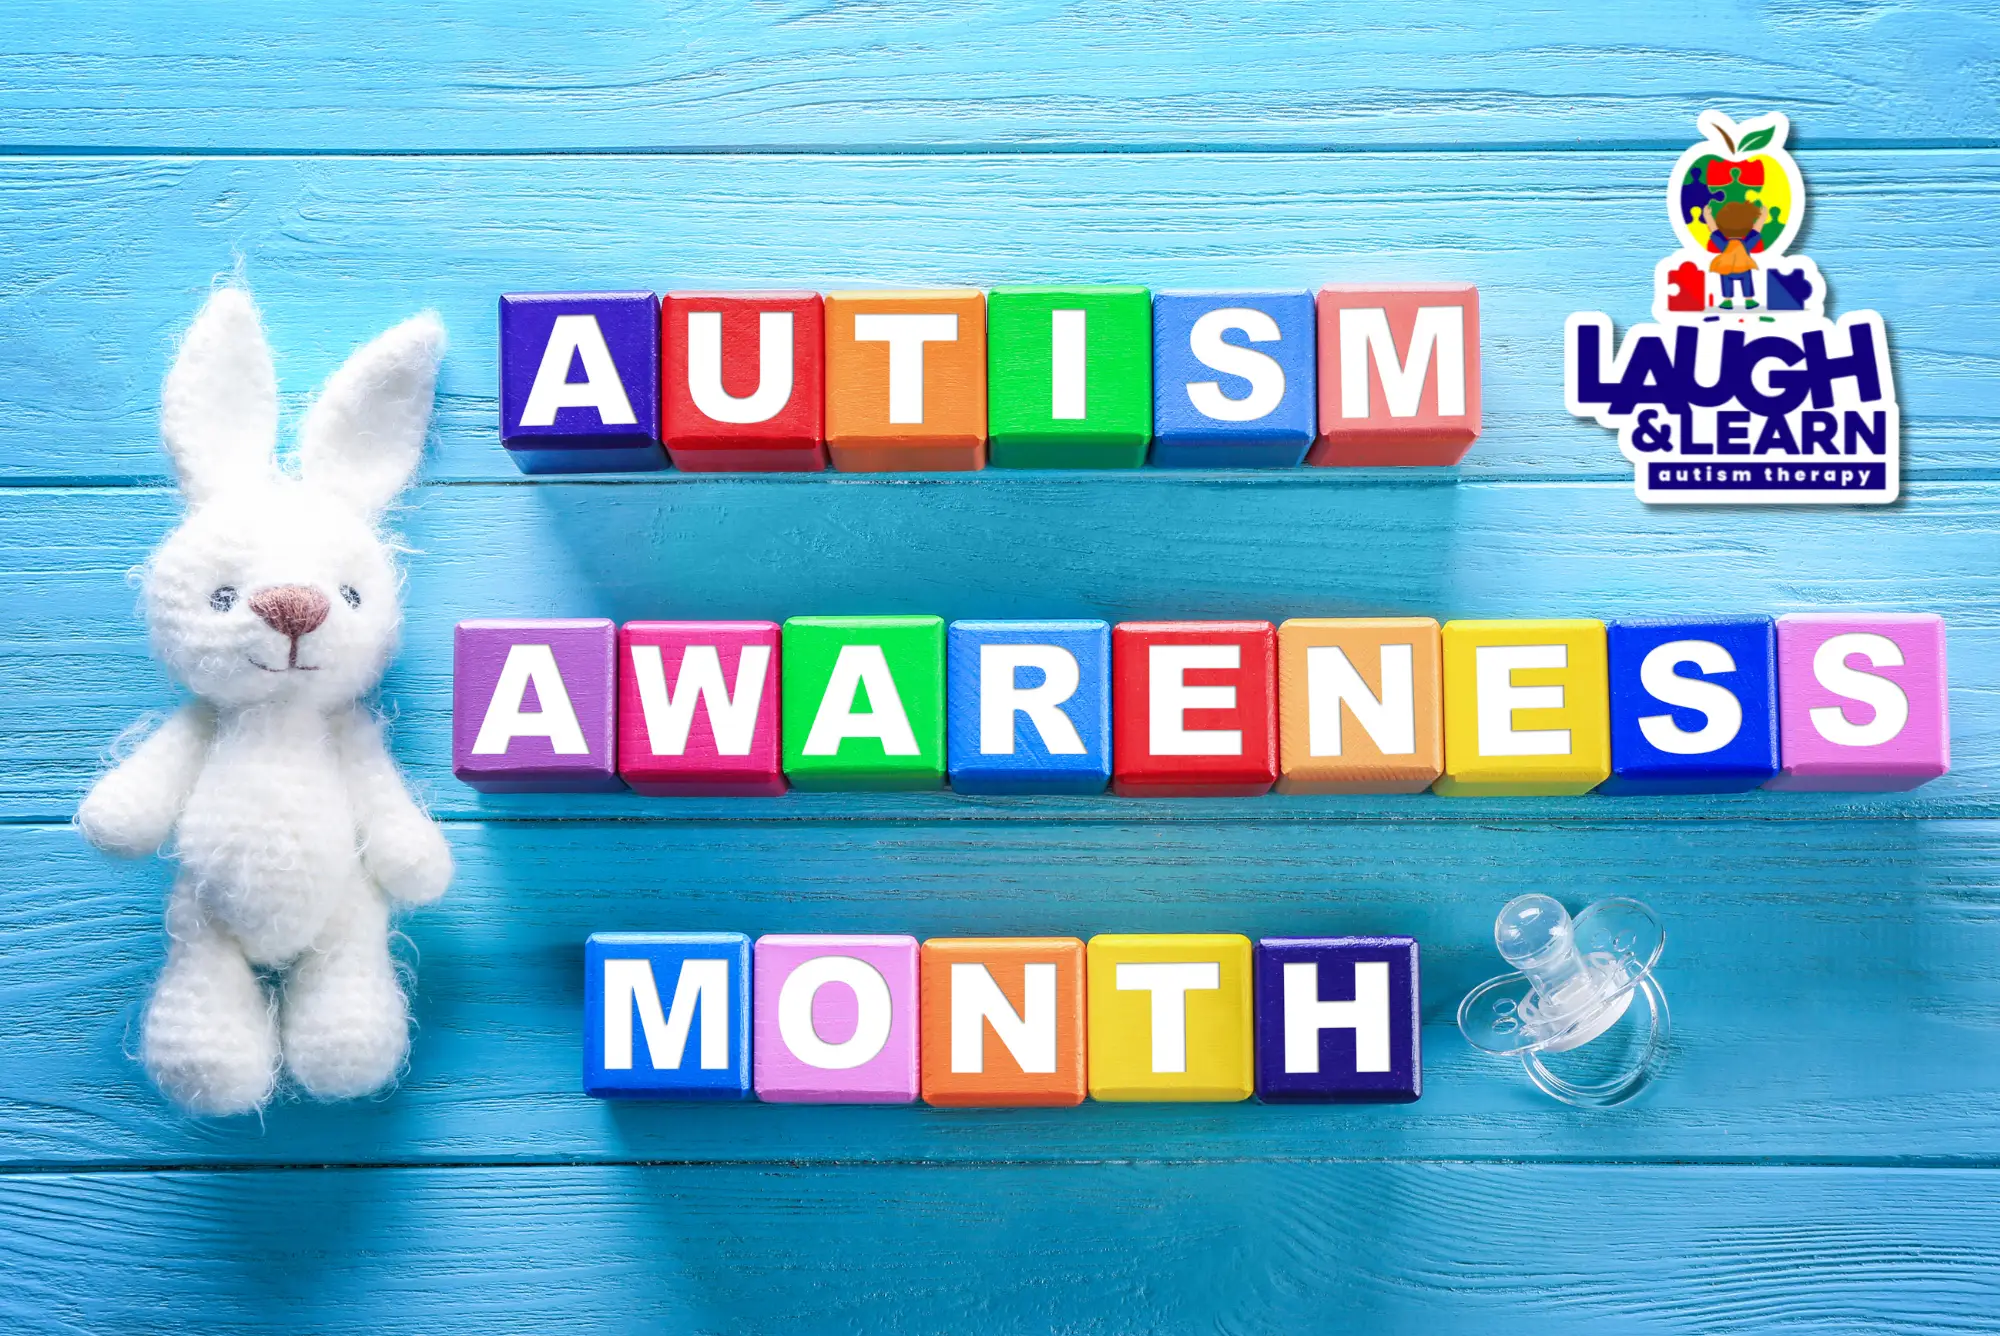 Autism Acceptance Month: How ABA Therapy Promotes Inclusion